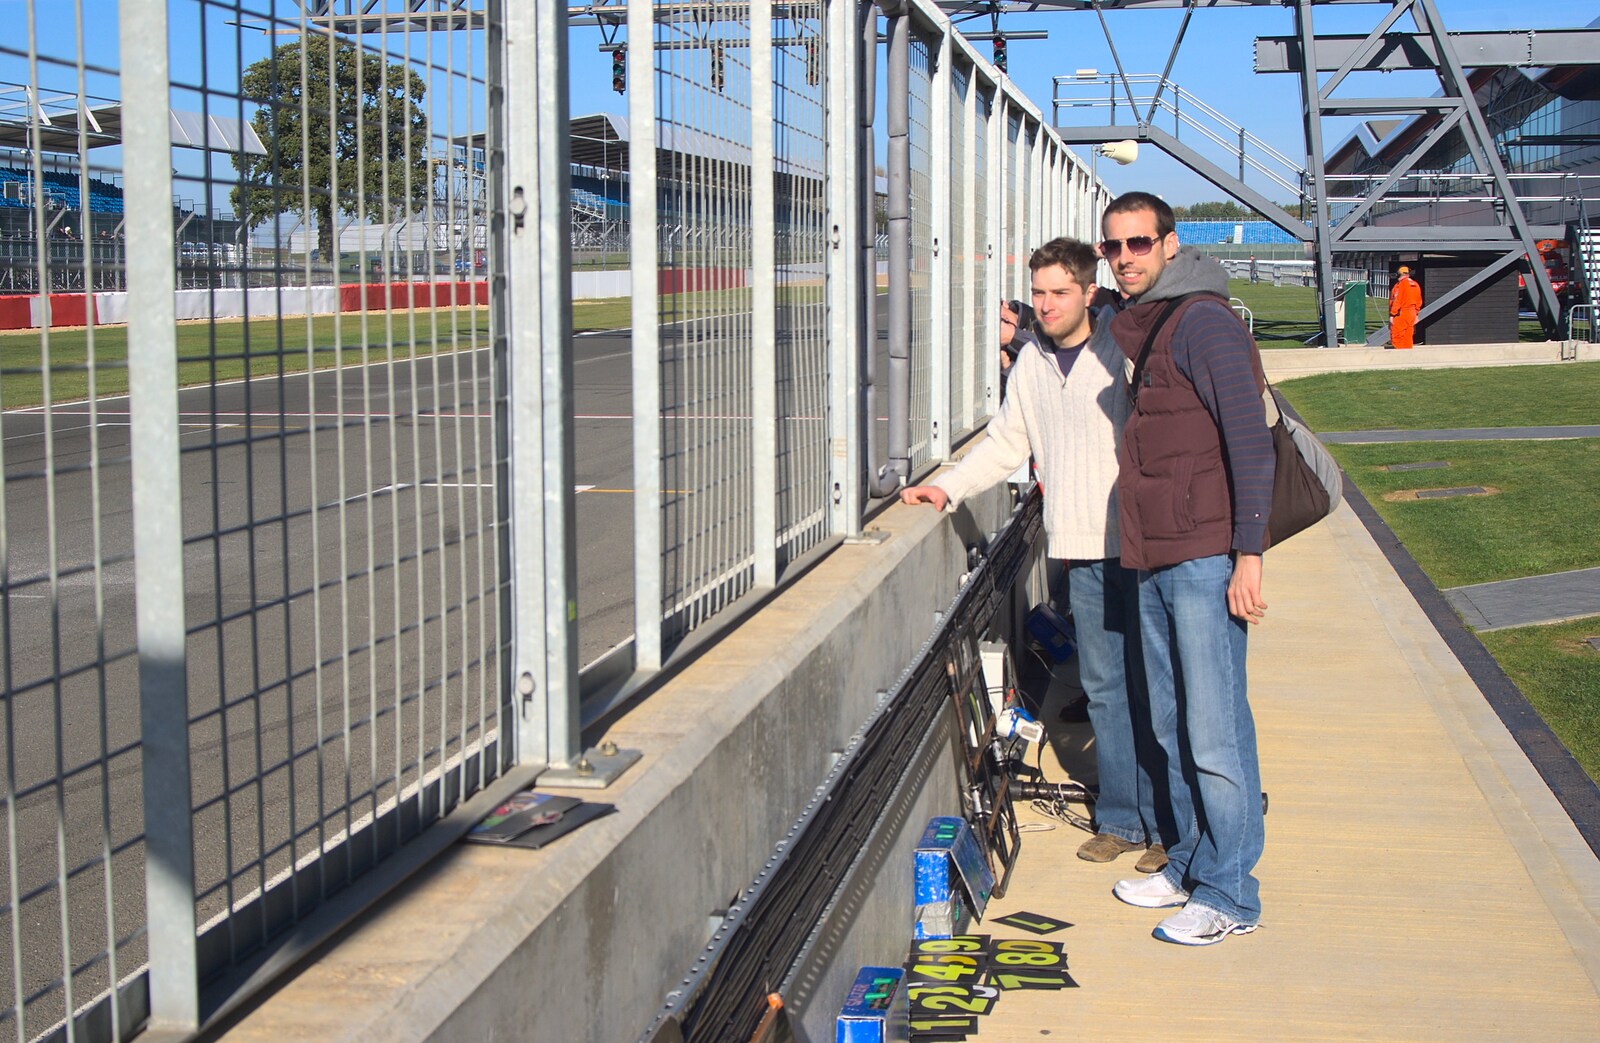 Doug and Ben wait by the 'debris wall' from TouchType at Silverstone, Northamptonshire - 22nd October 2011